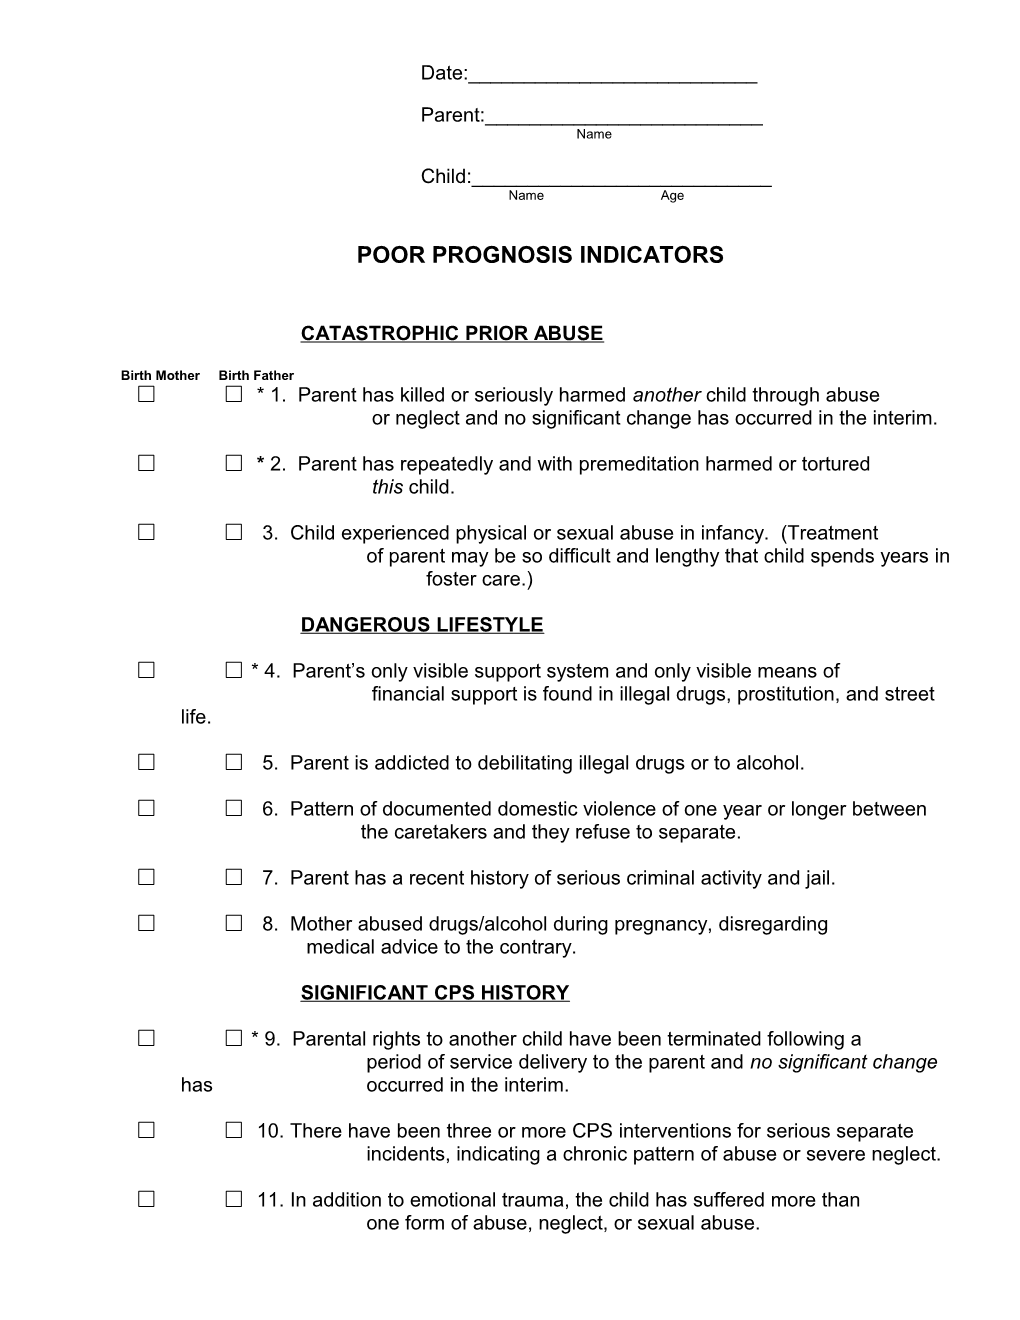 High Risk Indicators Which May Prevent Reunification Worksheet